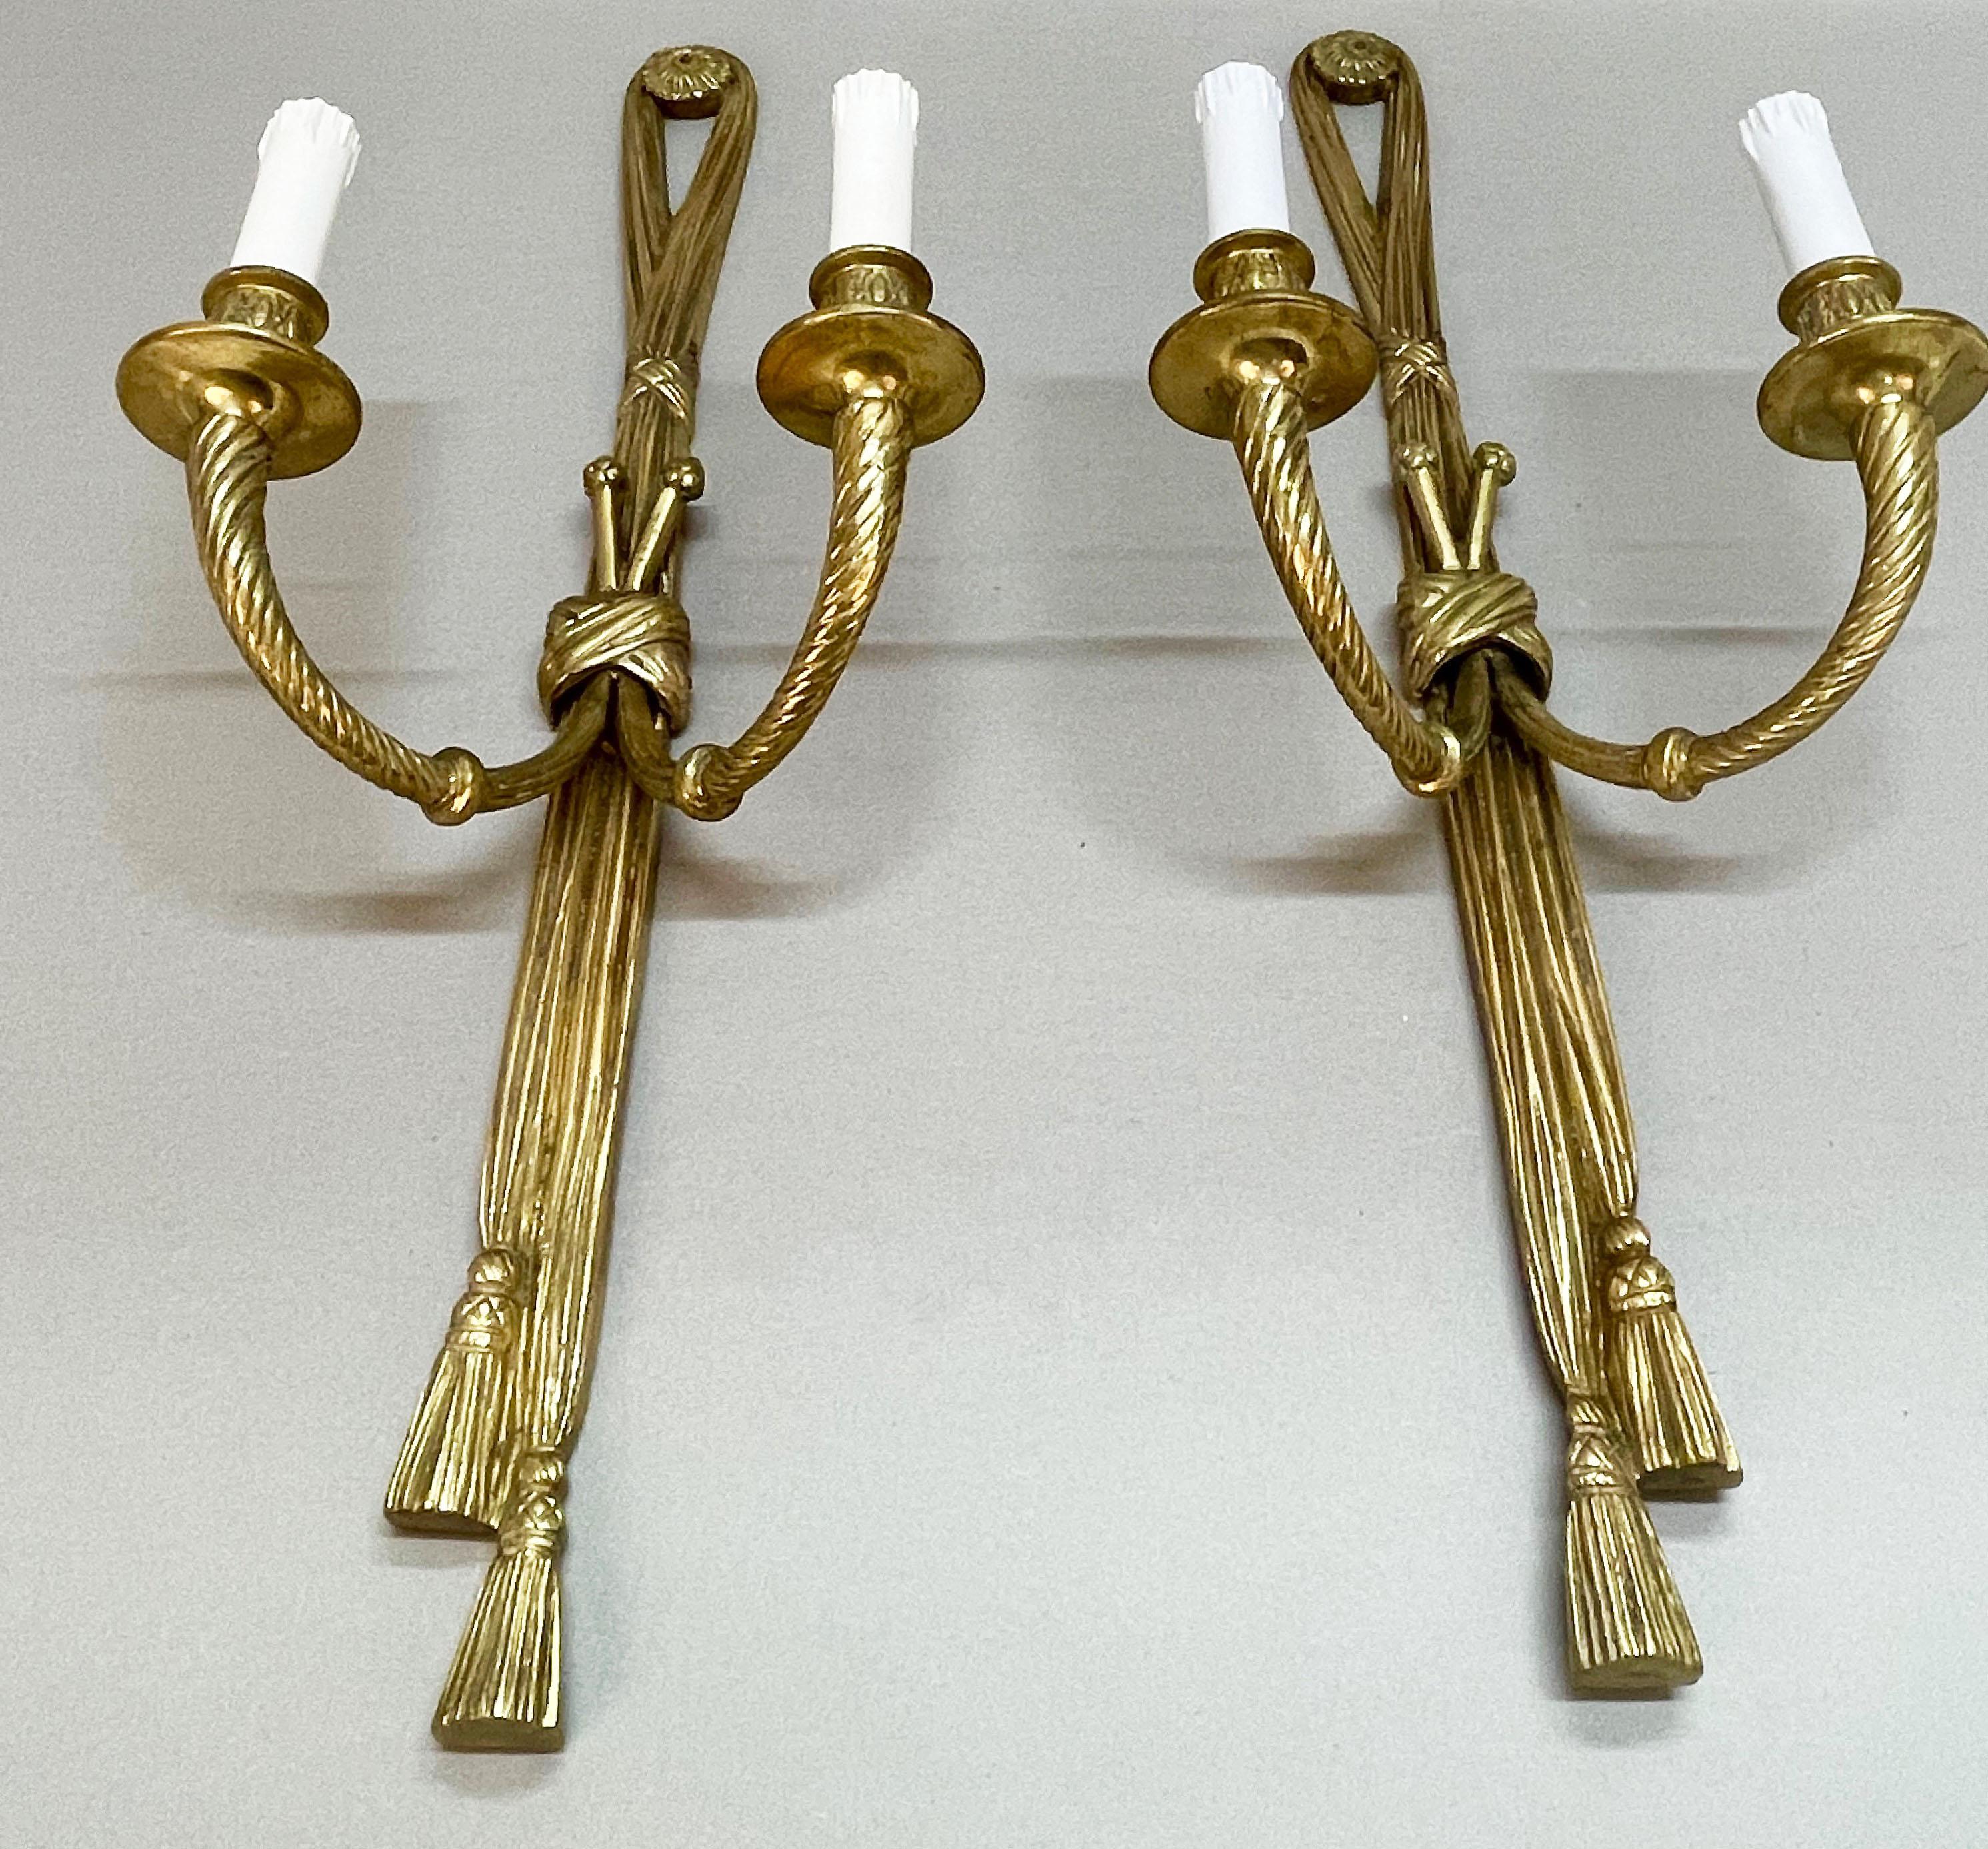 Pair of 19th Century Louis XVI Style Knot & Tassel Appliqué Wall Candle Sconces For Sale 5